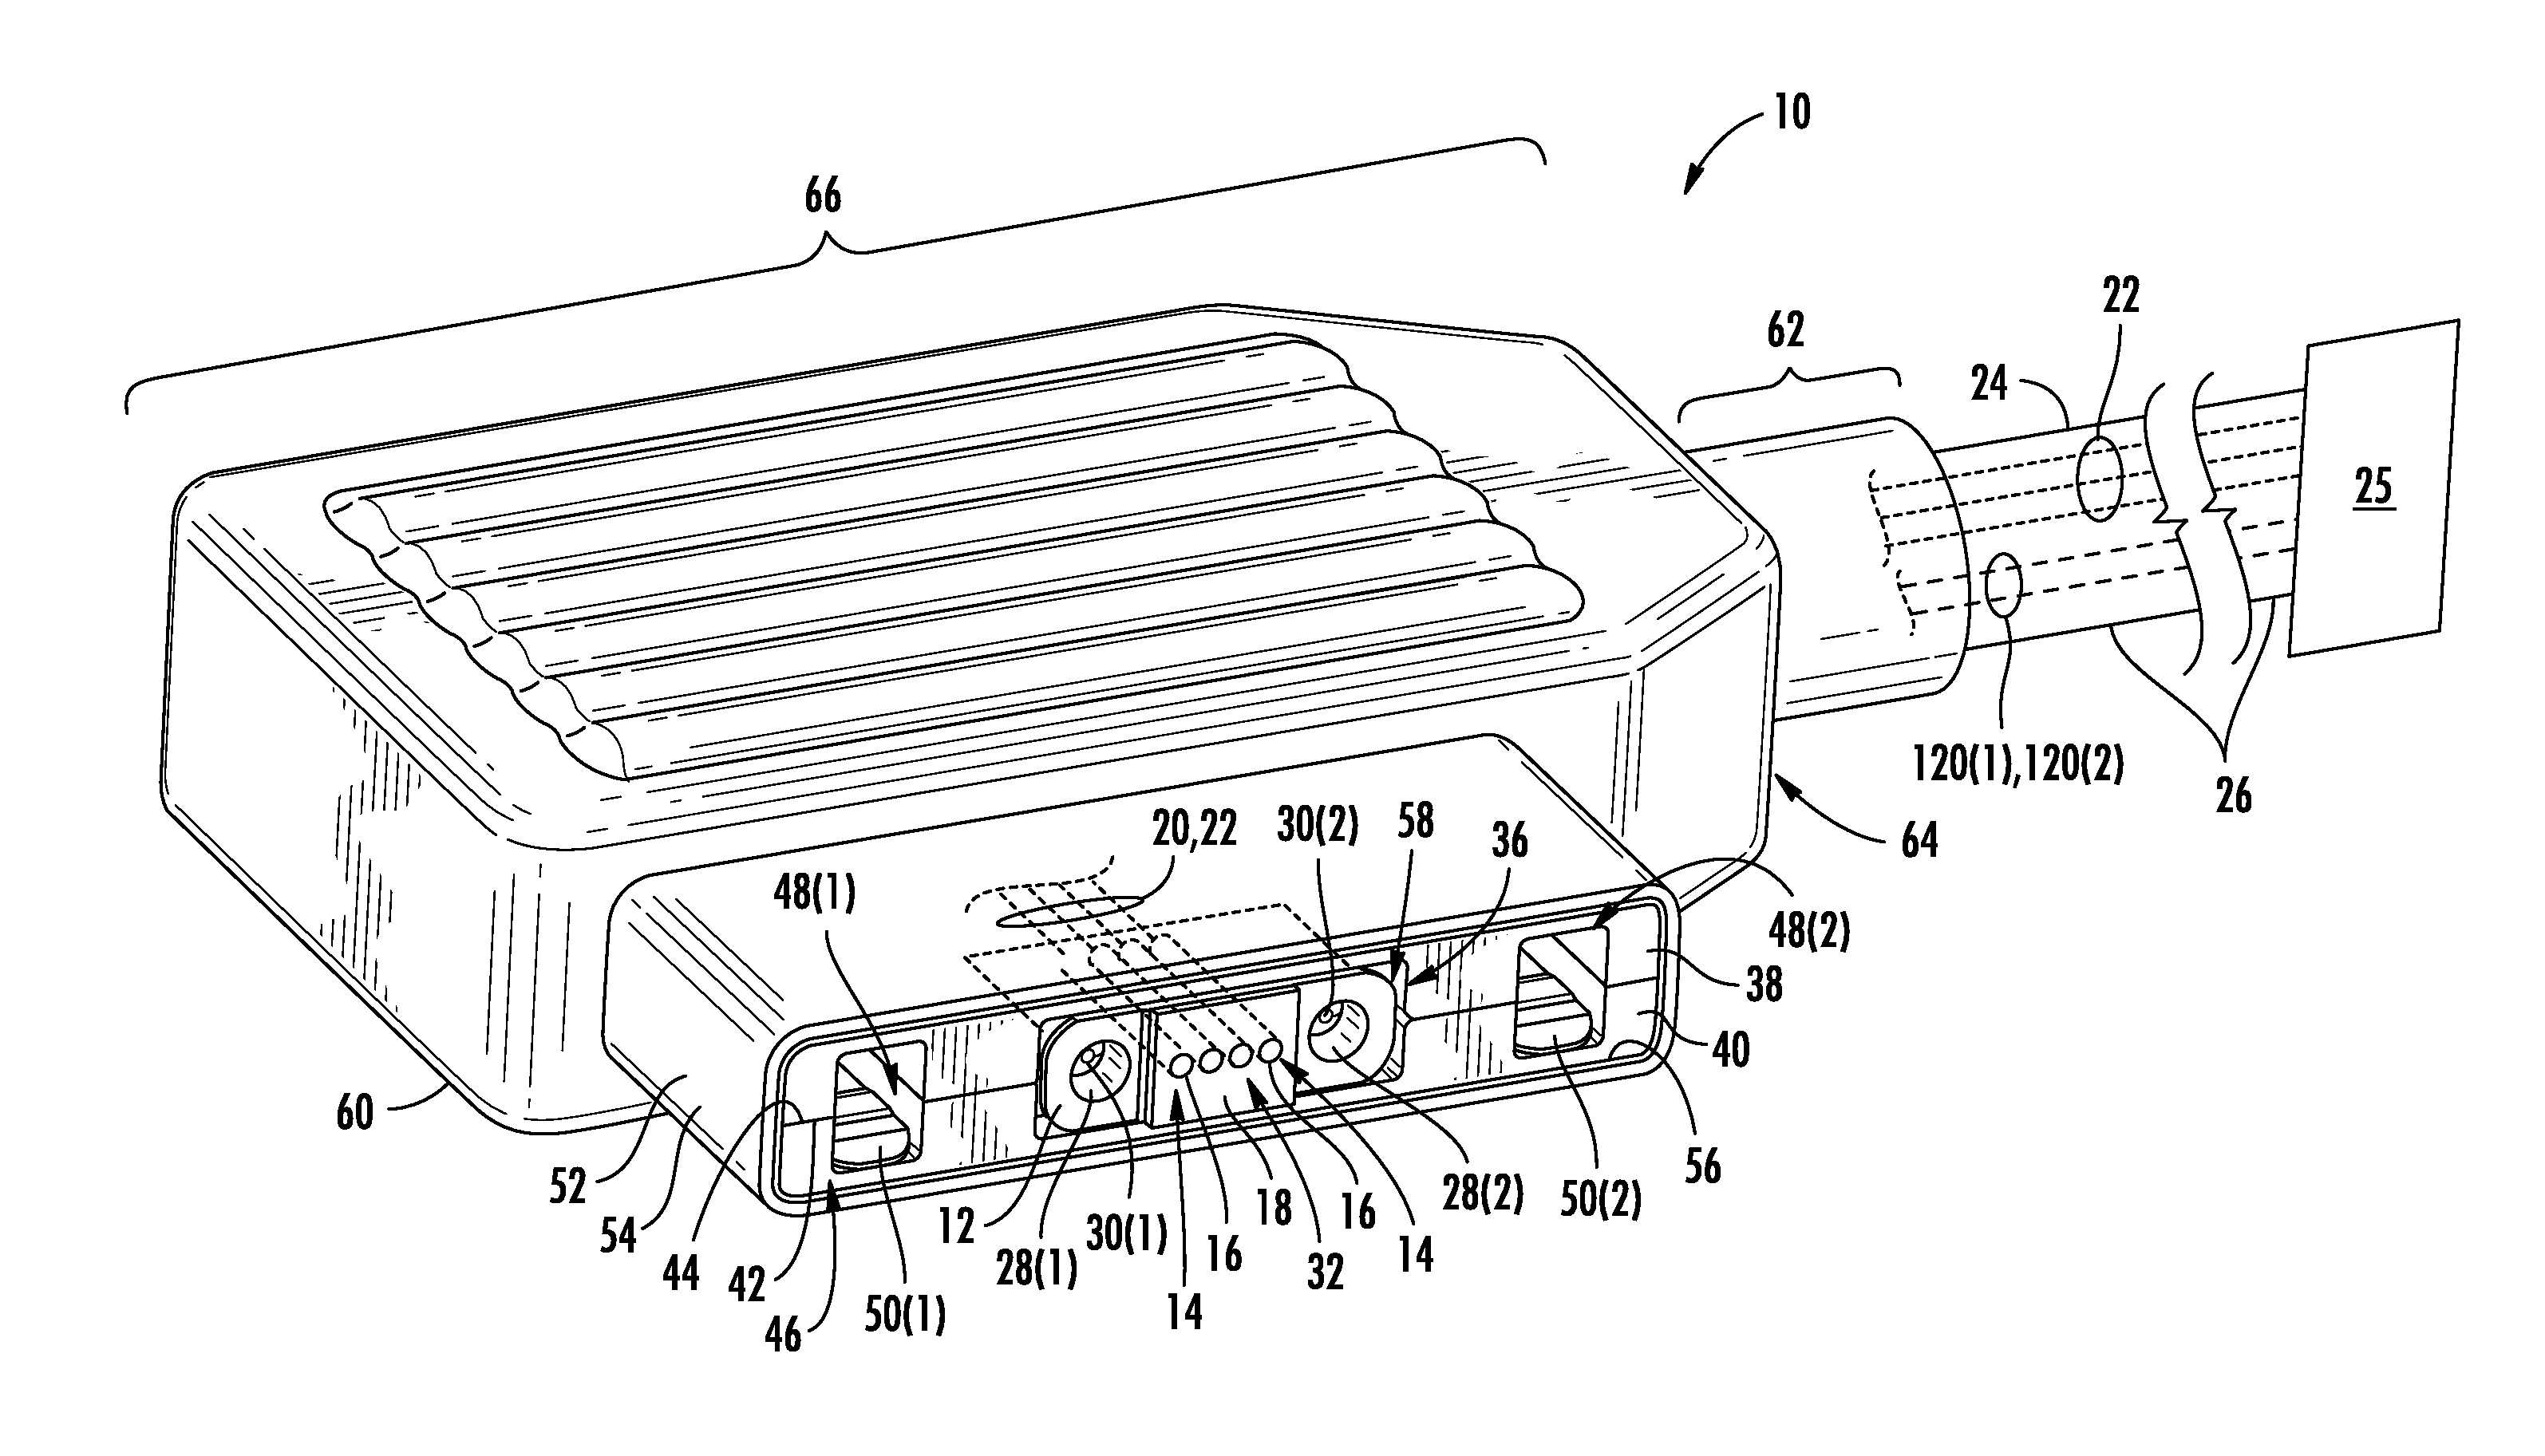 Fiber optic connectors employing moveable optical interfaces with fiber protection features and related components and methods